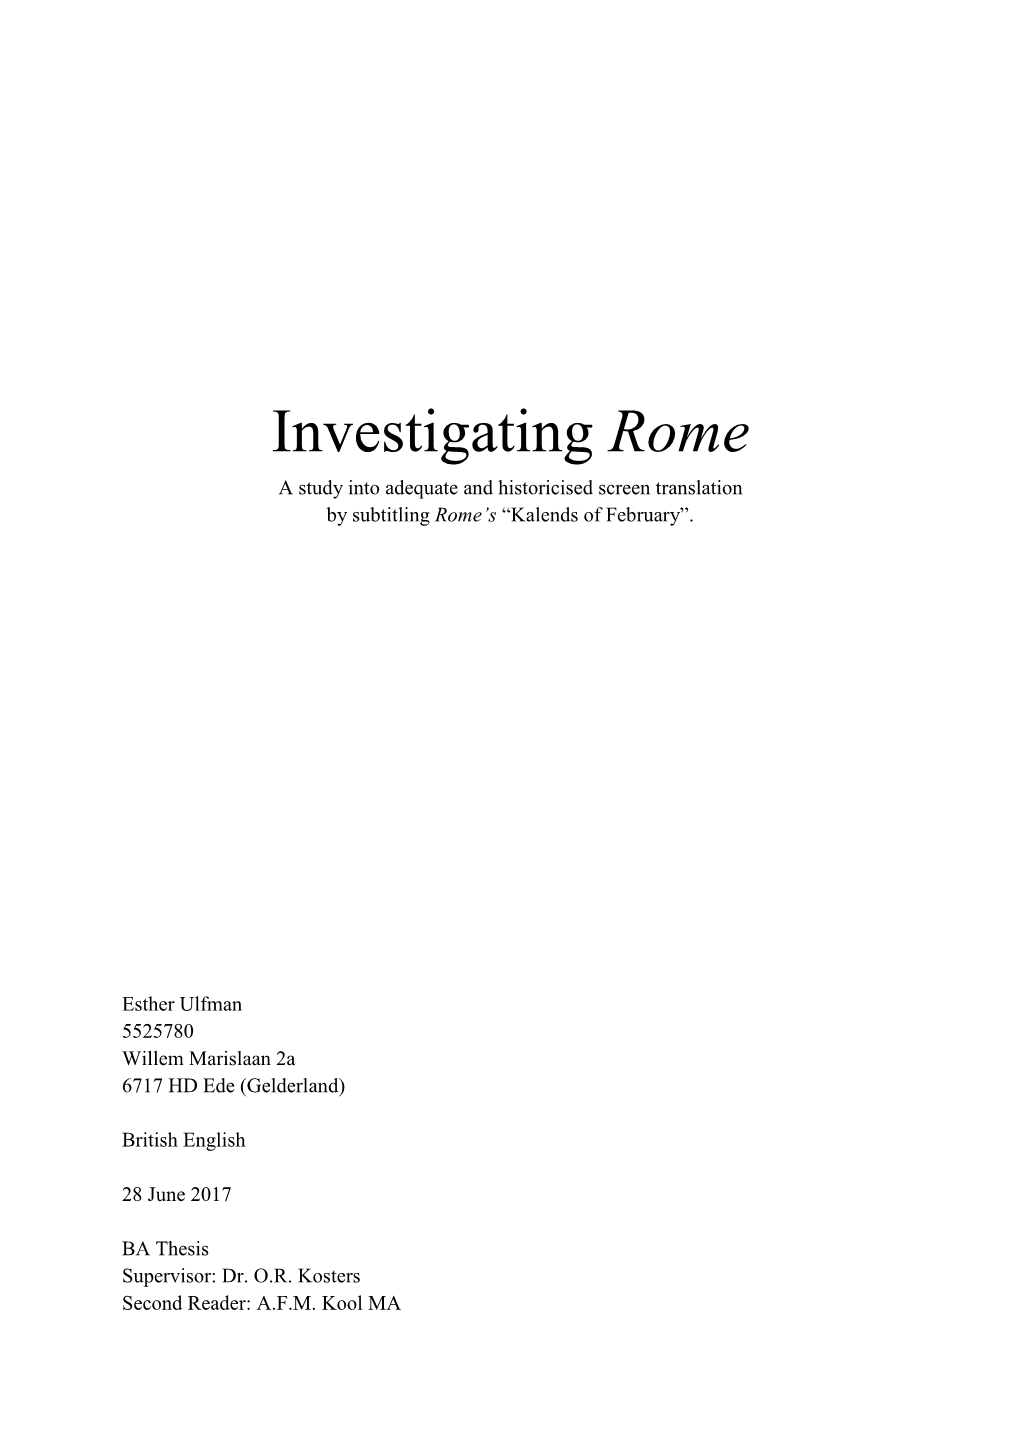 Investigating Rome a Study Into Adequate and Historicised Screen Translation by Subtitling Rome’S “Kalends of February”